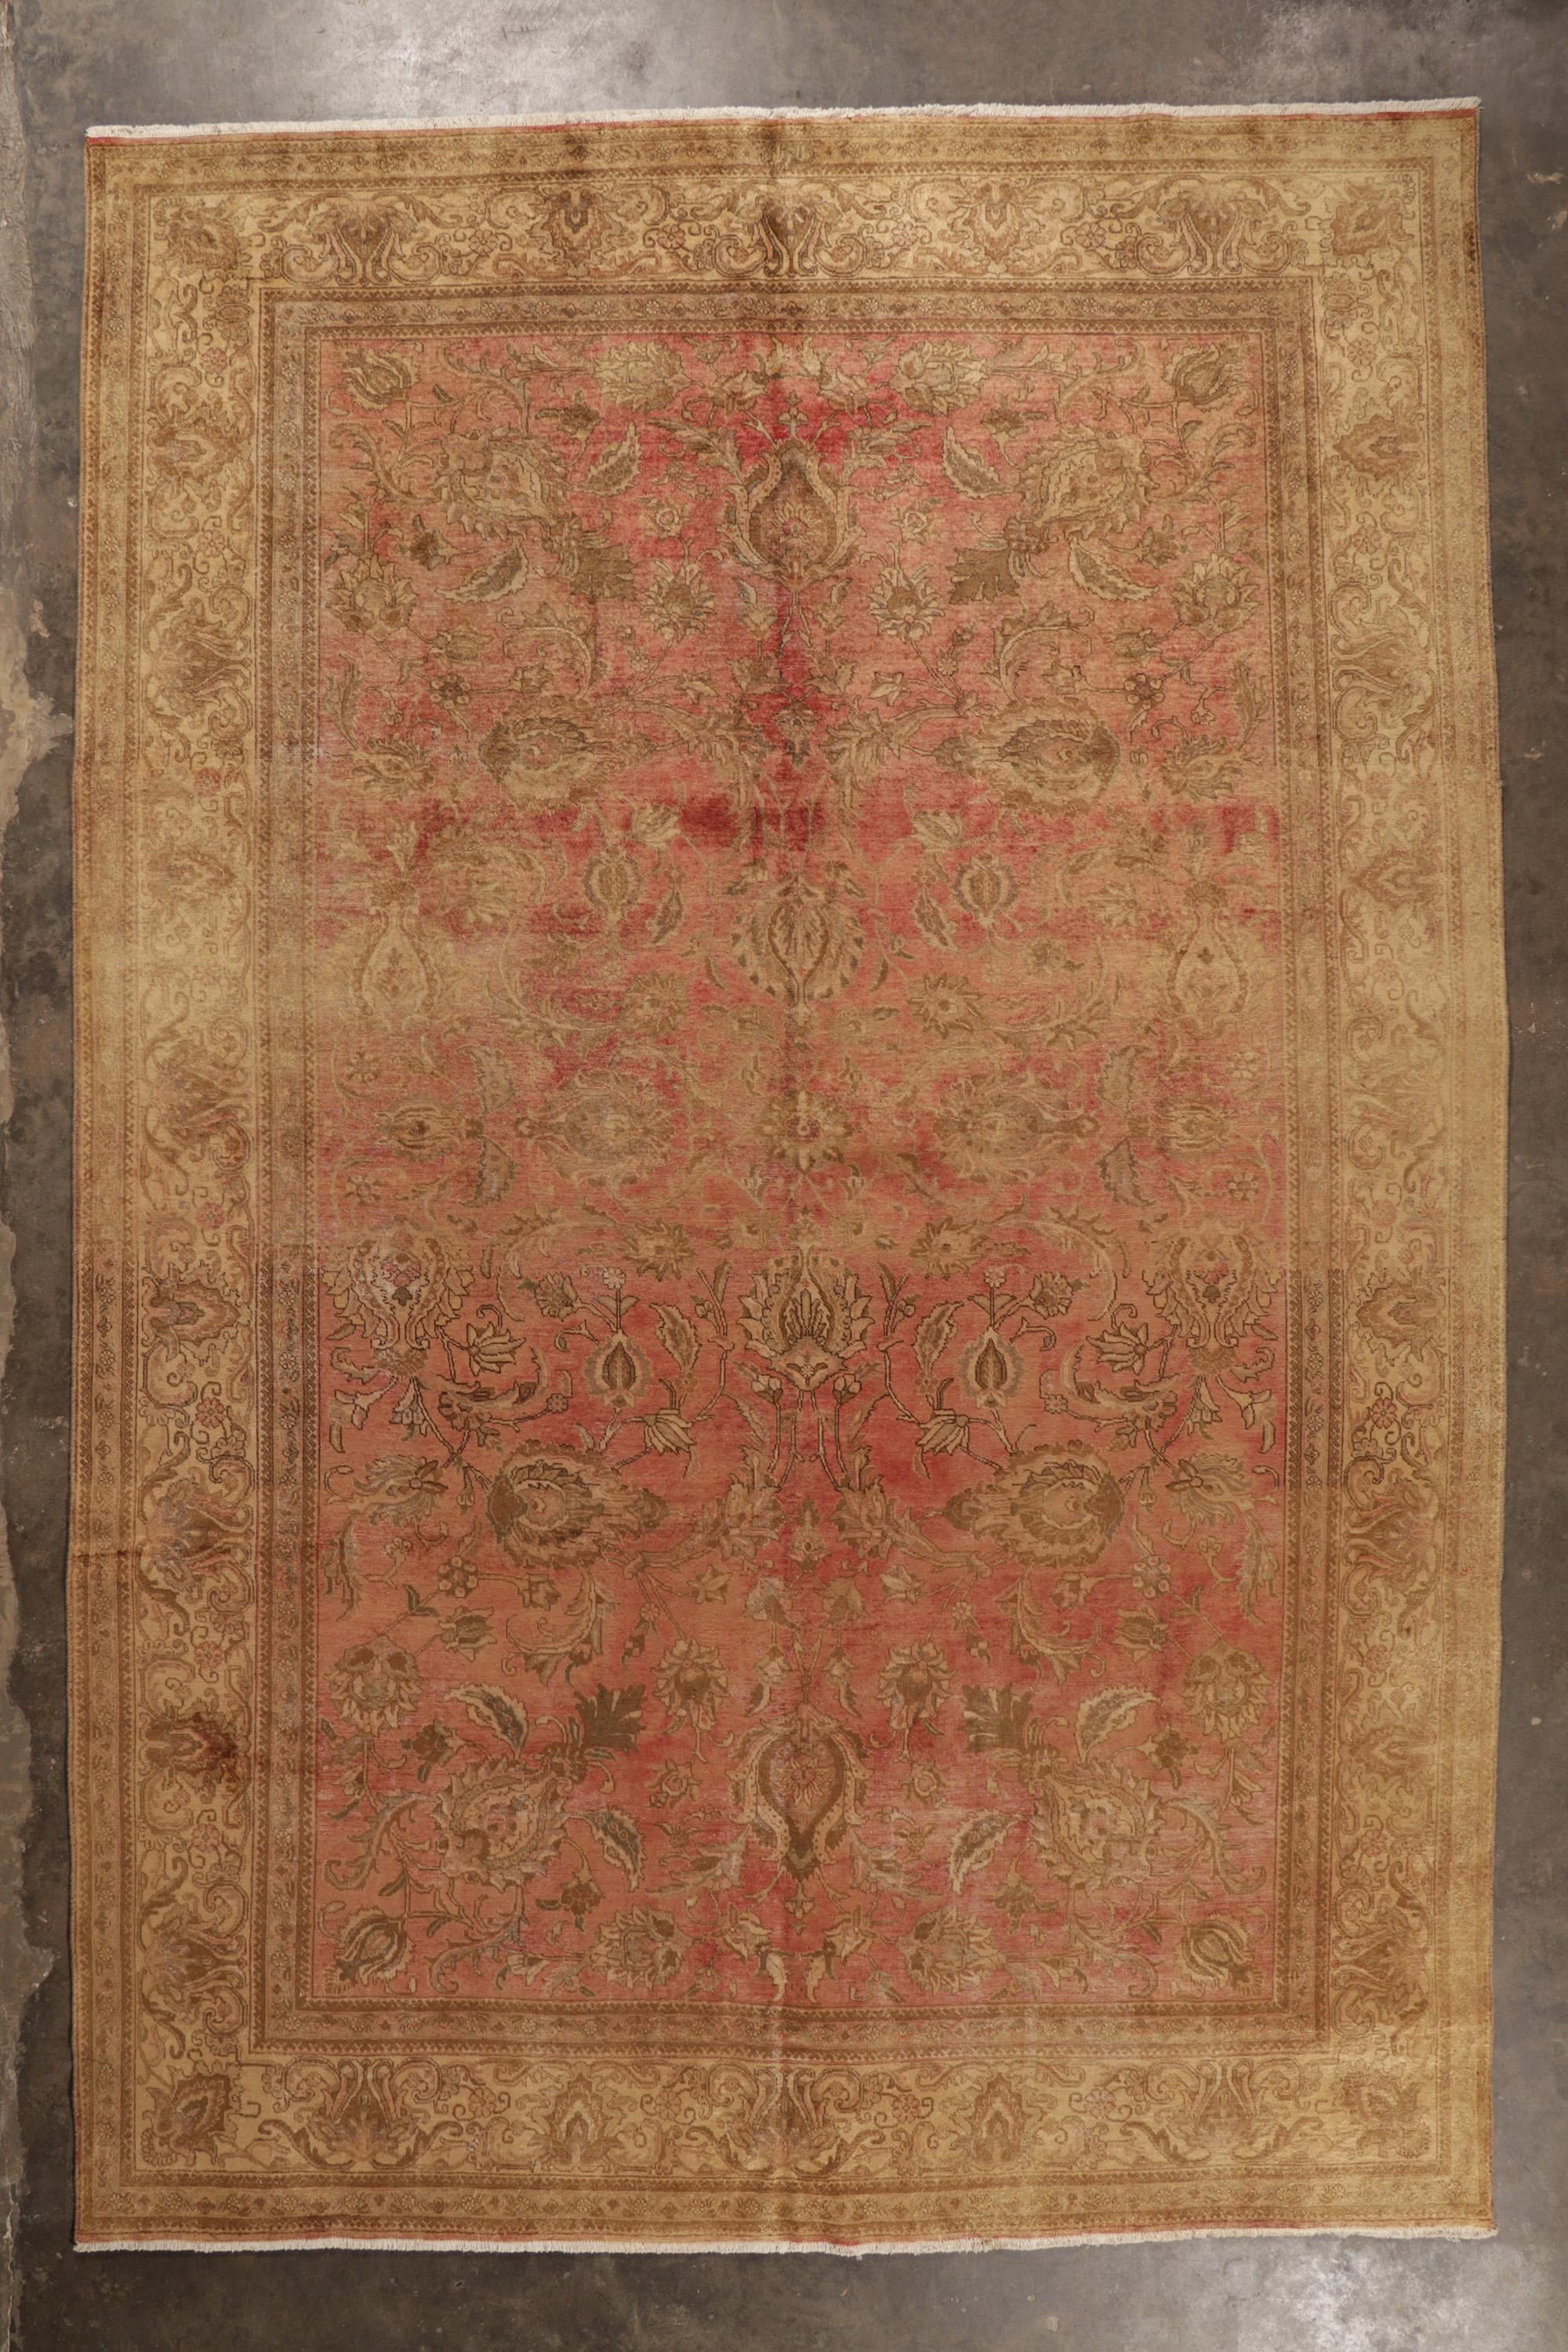 Distressed Antique Persian Tabriz Rug with Rustic English Cottage Style 2